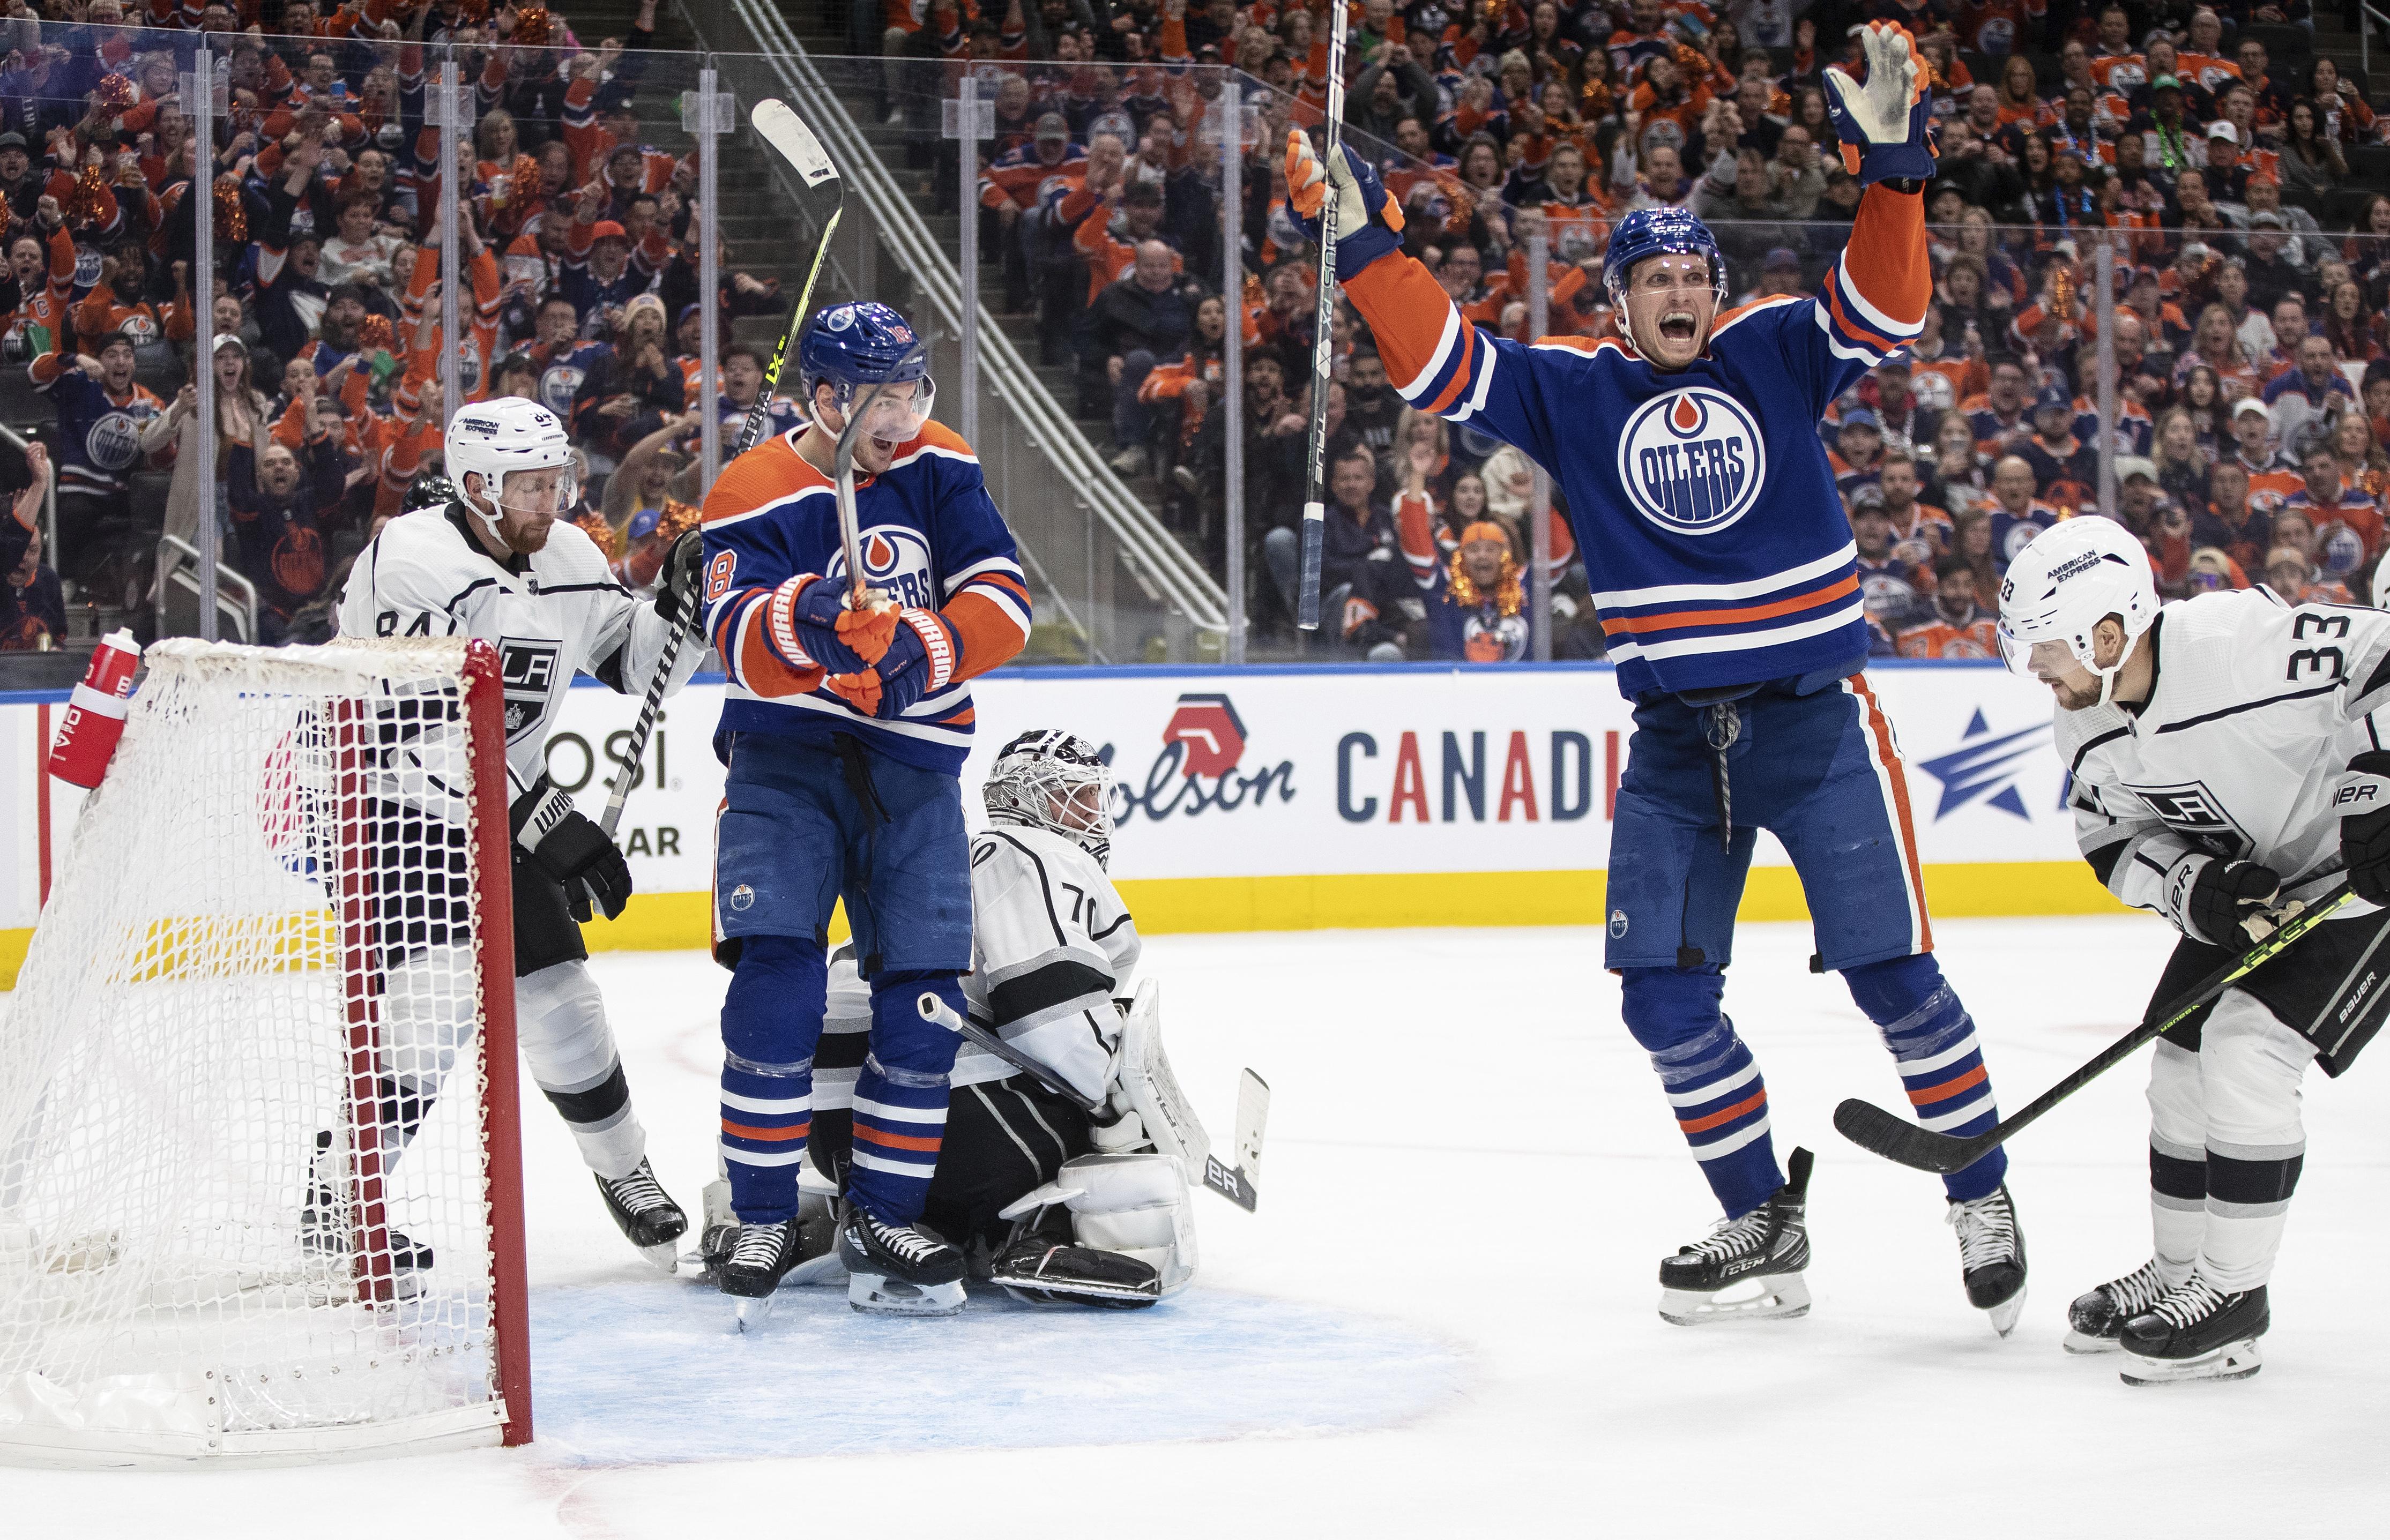 Oilers beat Kings 4-2 in Game 2 to tie first-round series